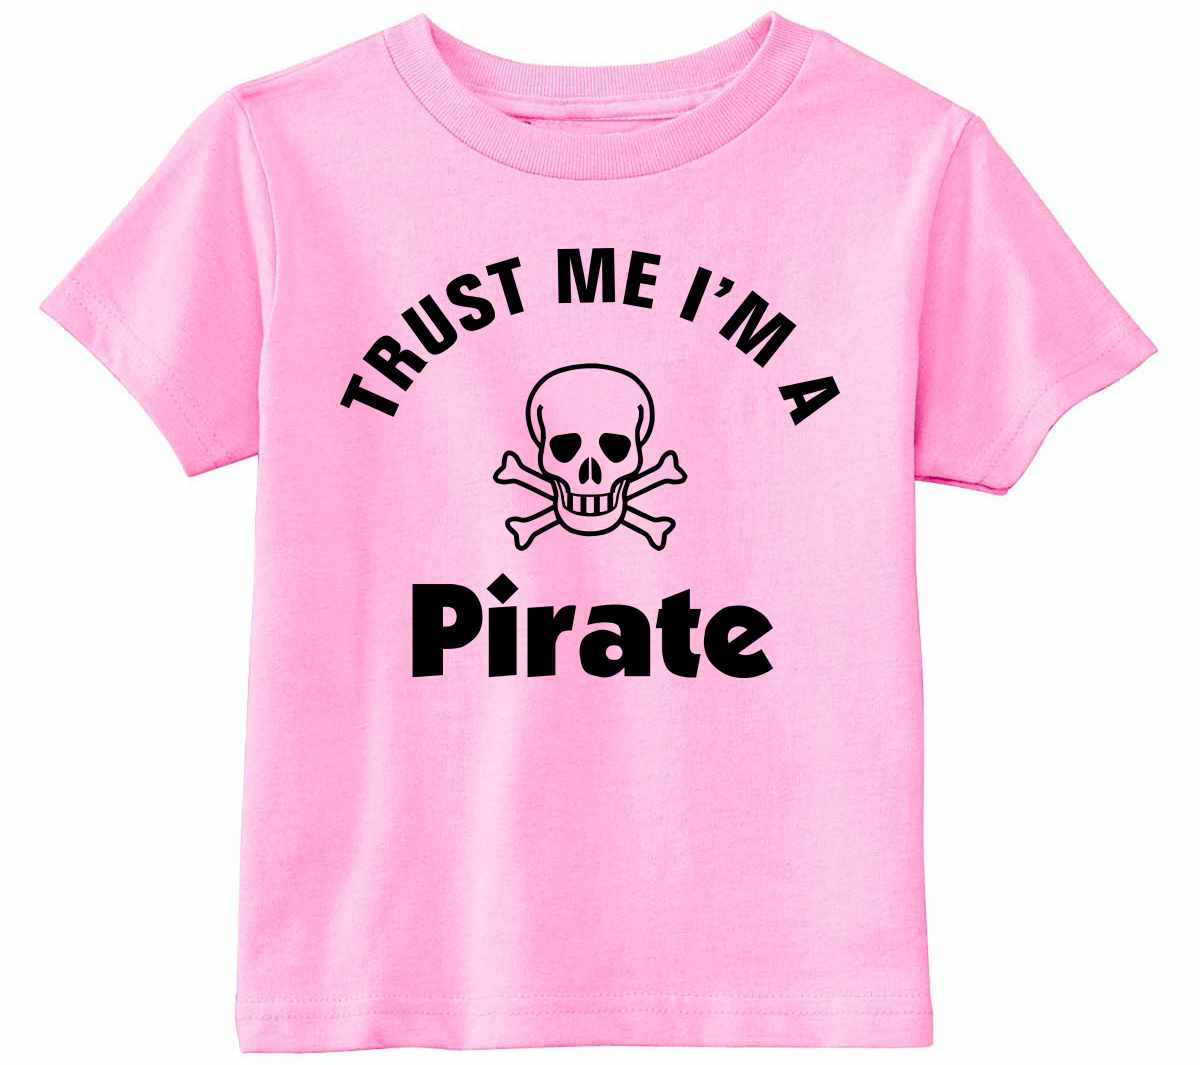 Trust Me I'm a Pirate Infant/Toddler  (#808-7)